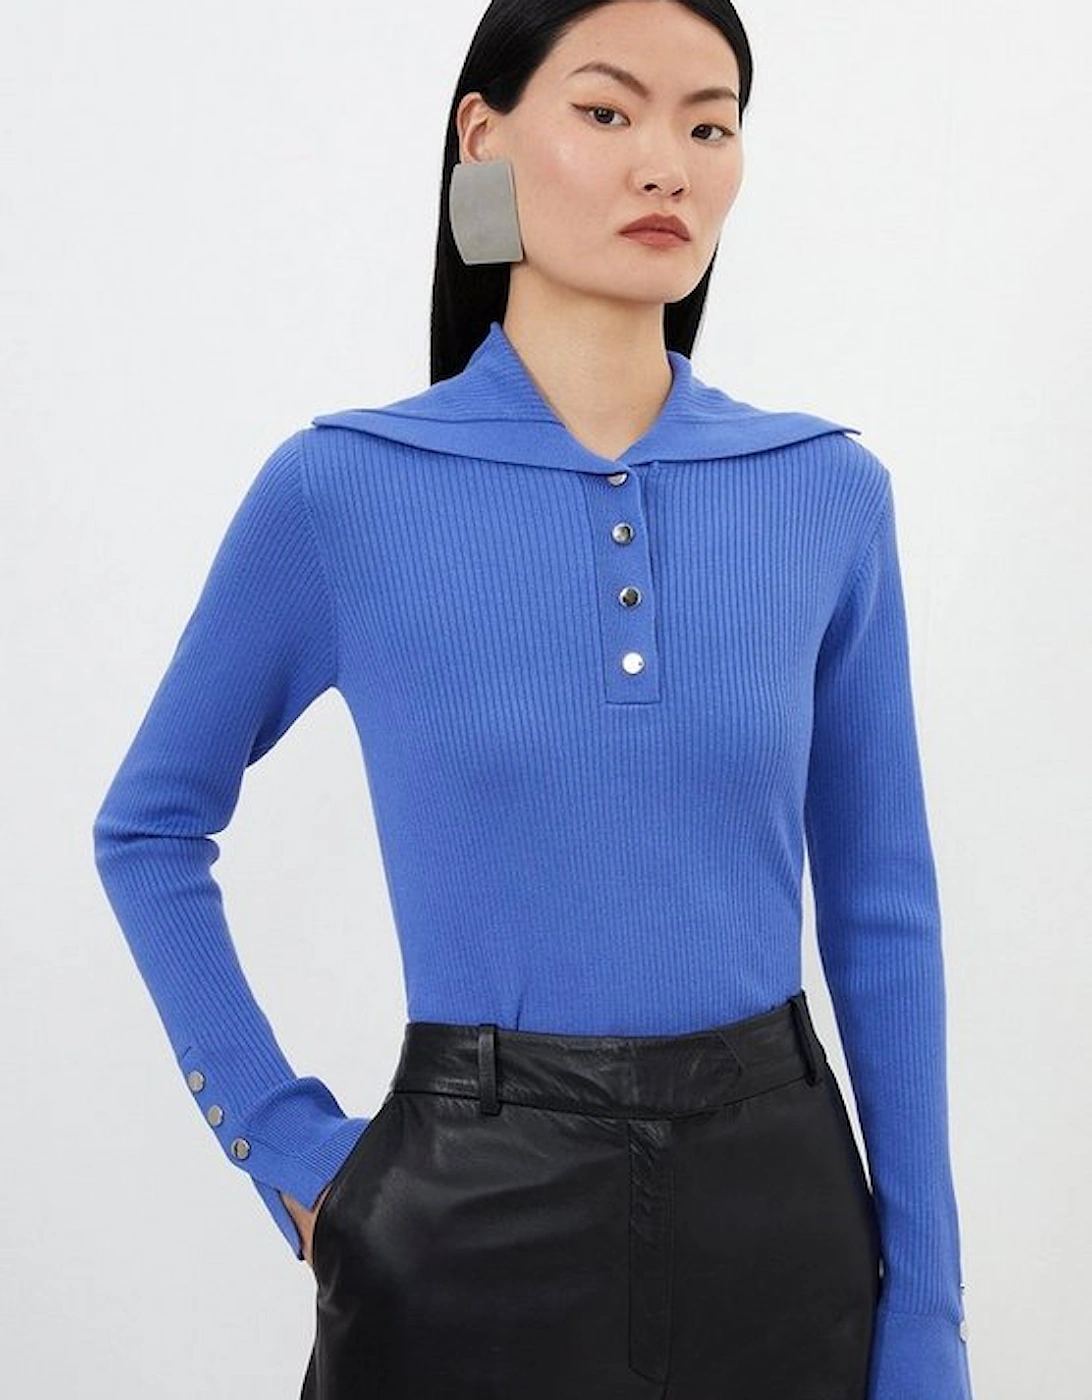 Viscose Blend Trimmed Collared Knit Top